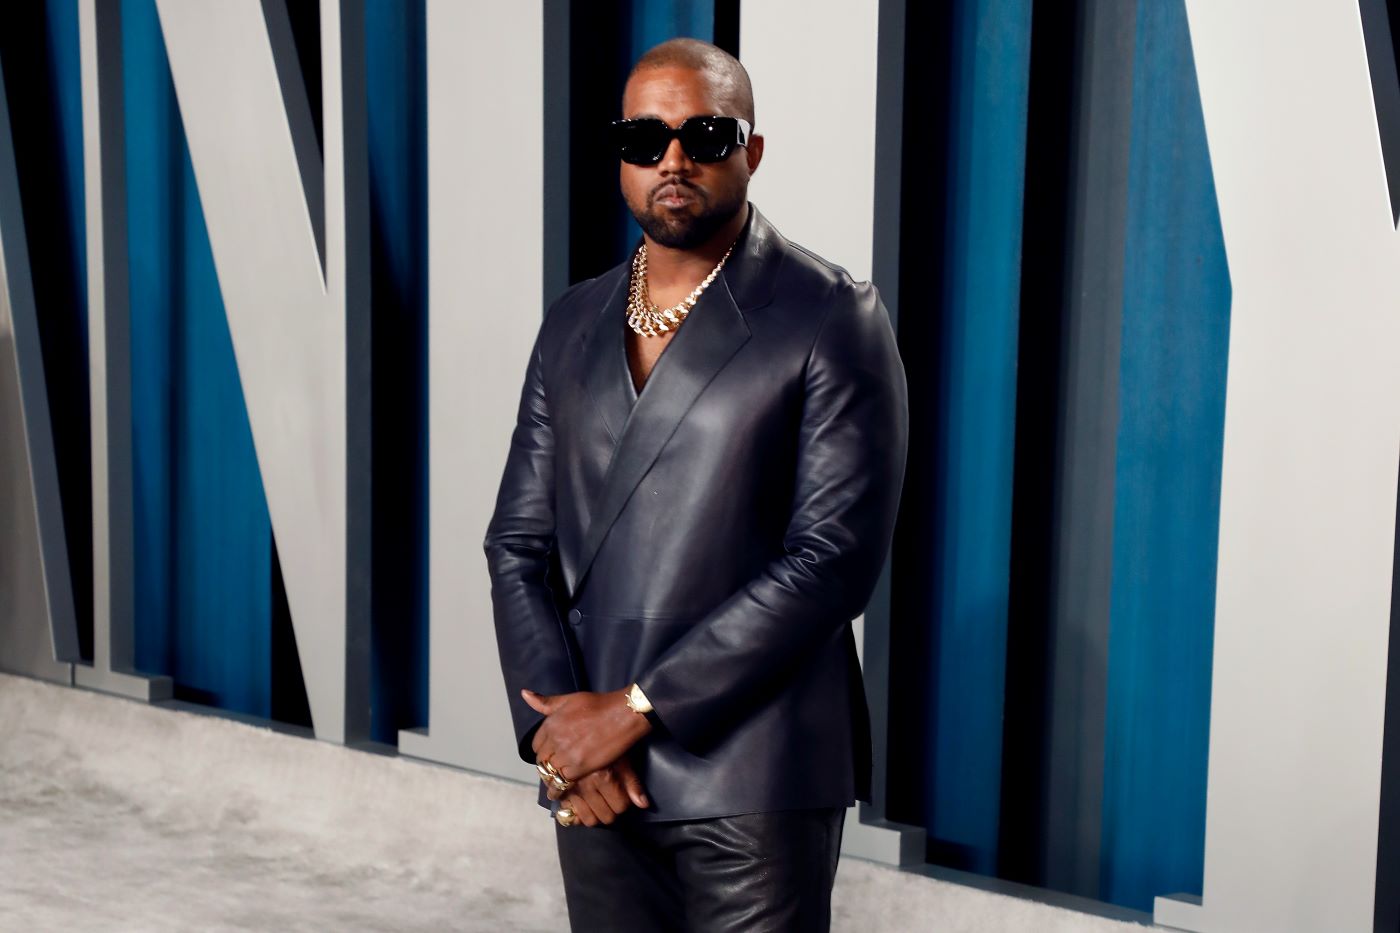 Kanye West dressed in a shiny black suit in front of a blue and white background.